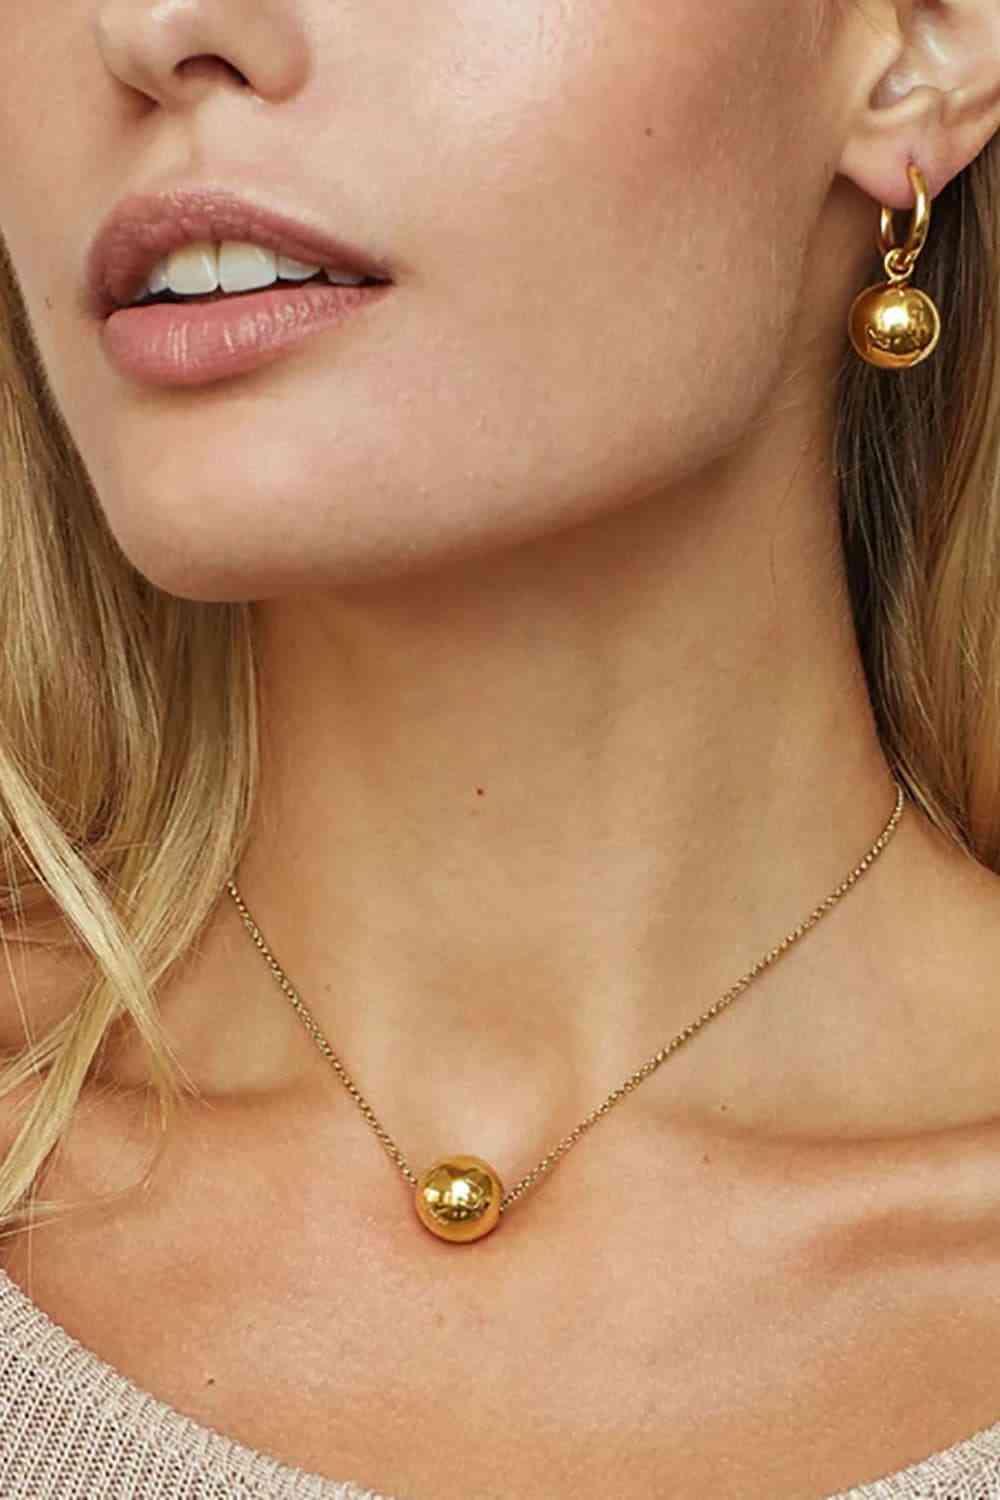 18K Gold-Plated Round Shape Pendant Necklace BLUE ZONE PLANET